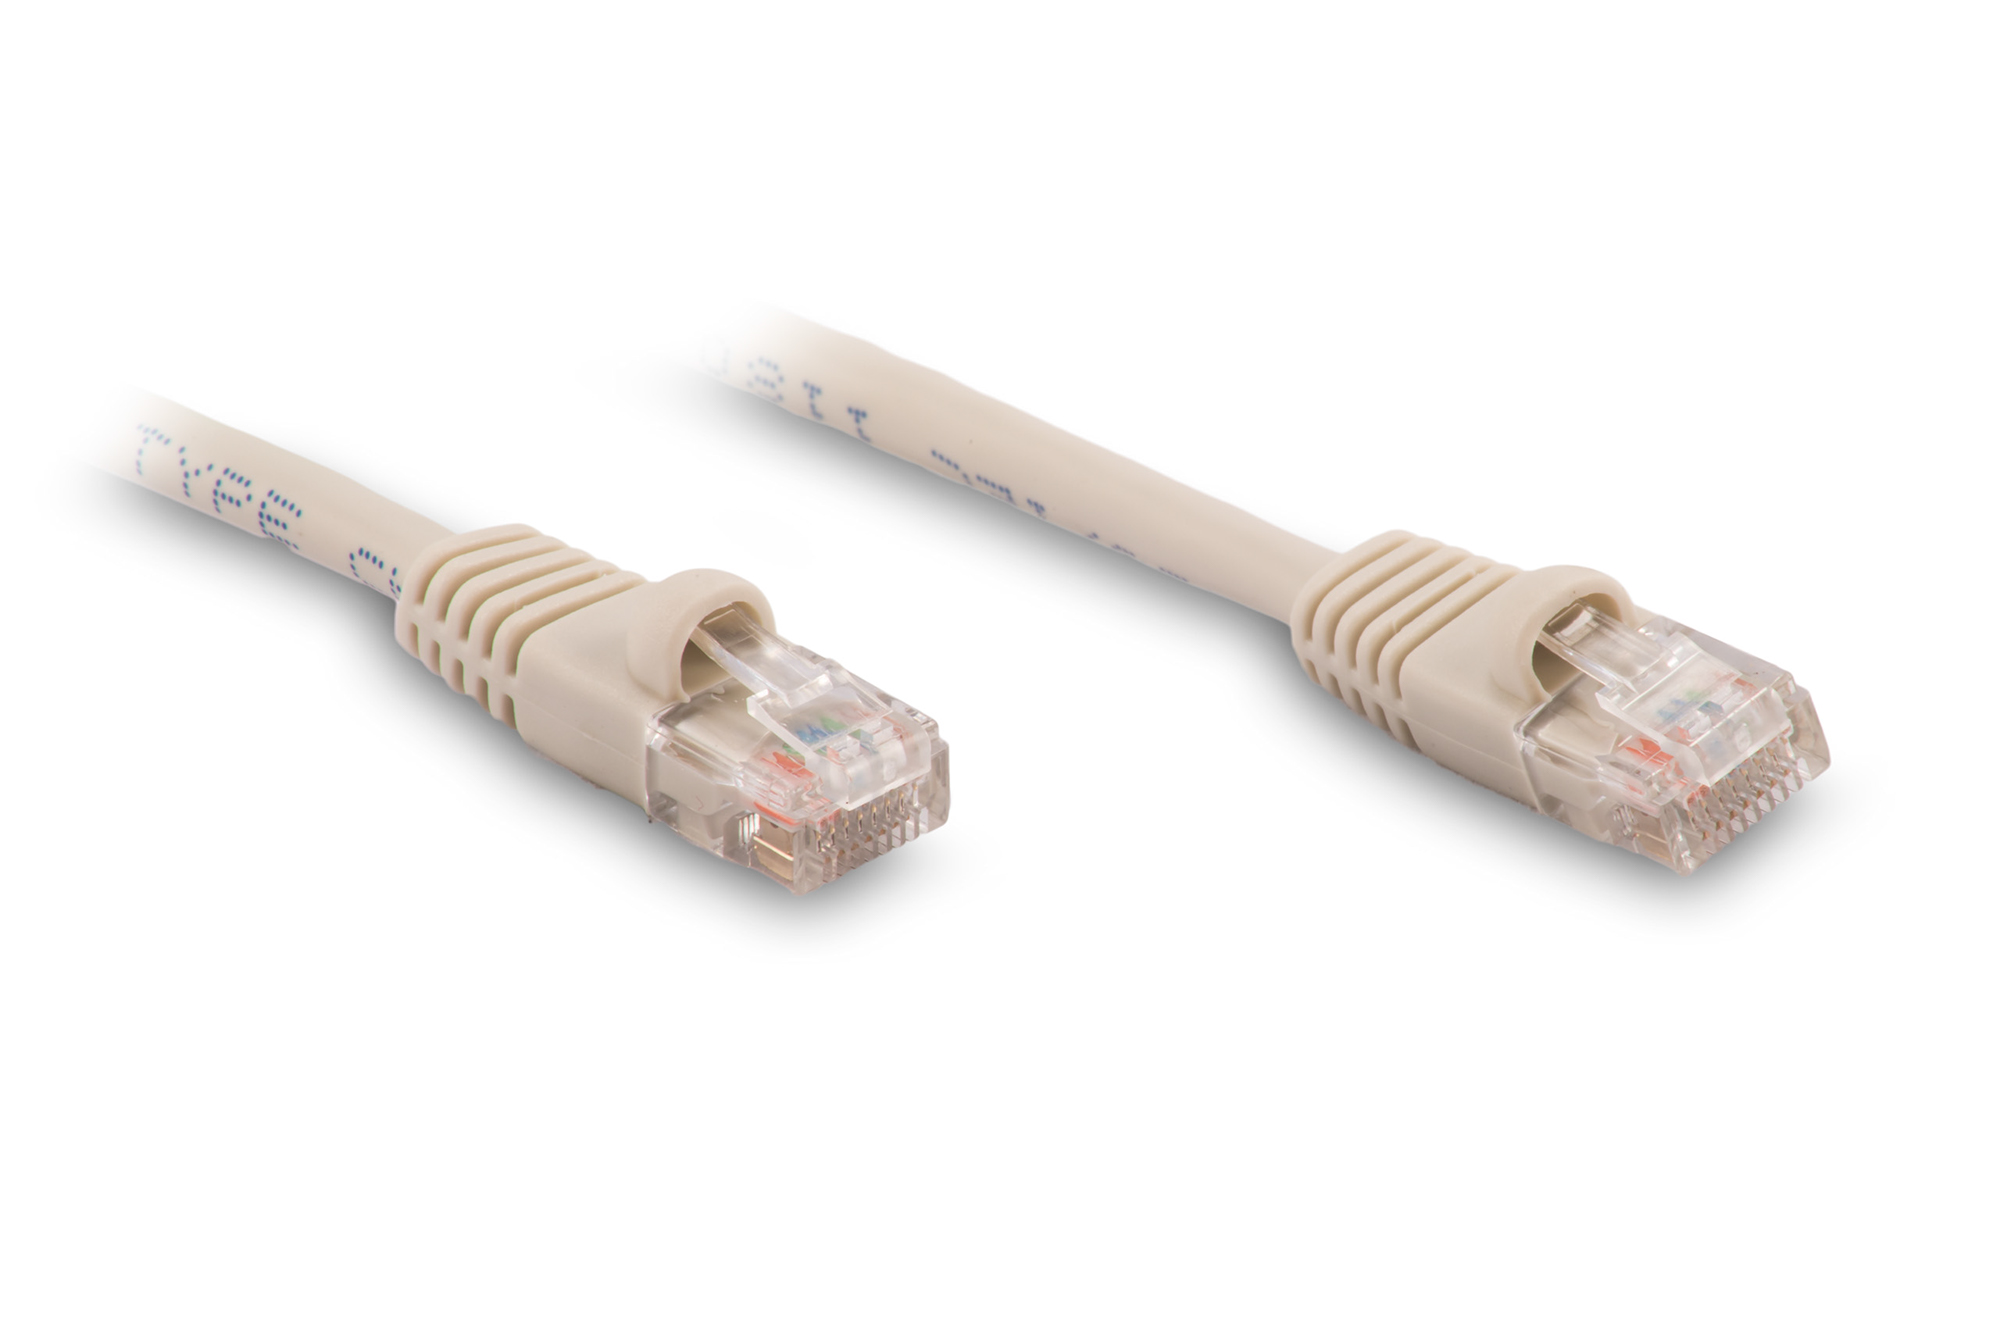 6FT Cat6 Ethernet Patch Cable - Gray Color - Snagless Boot